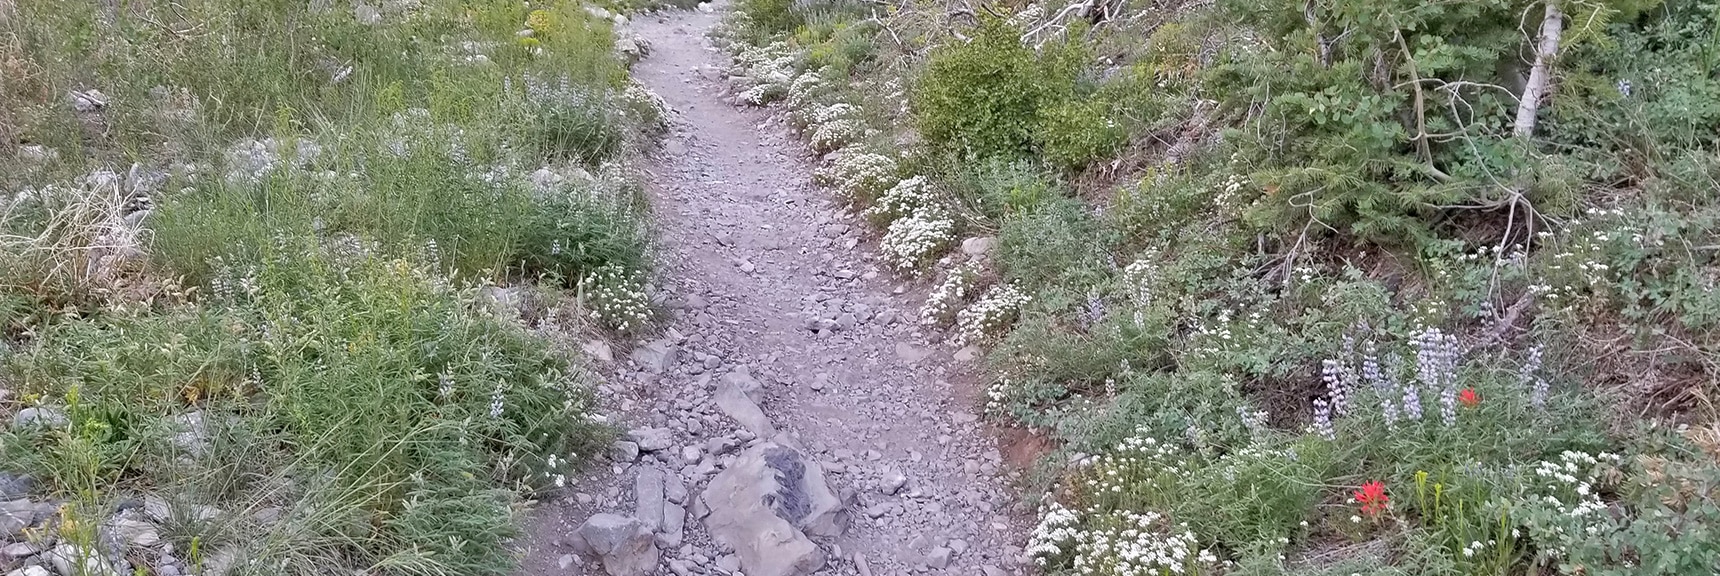 Spring Wild Flowers on the Trail, Third Weekend in June | Sexton Ridge Descent from Griffith Peak, Mt. Charleston Wilderness, Spring Mountains, Nevada